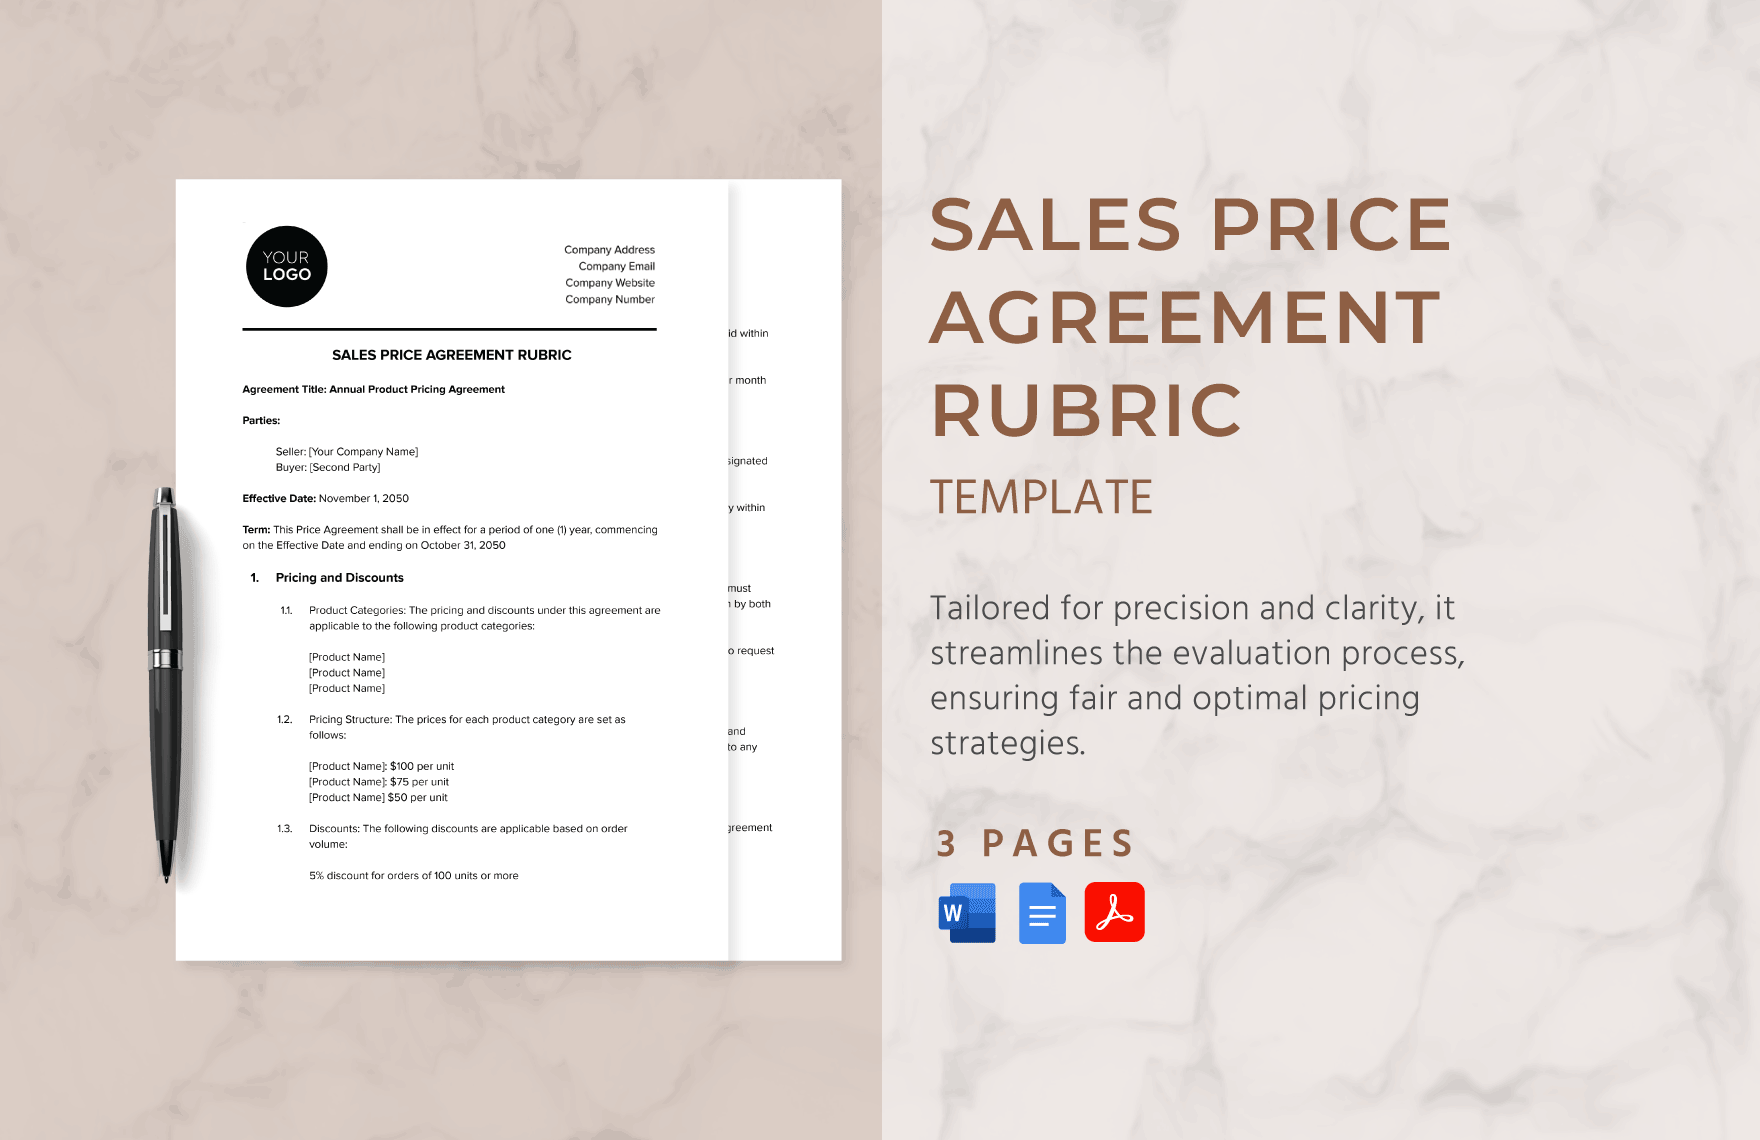 Sales Price Agreement Rubric Template